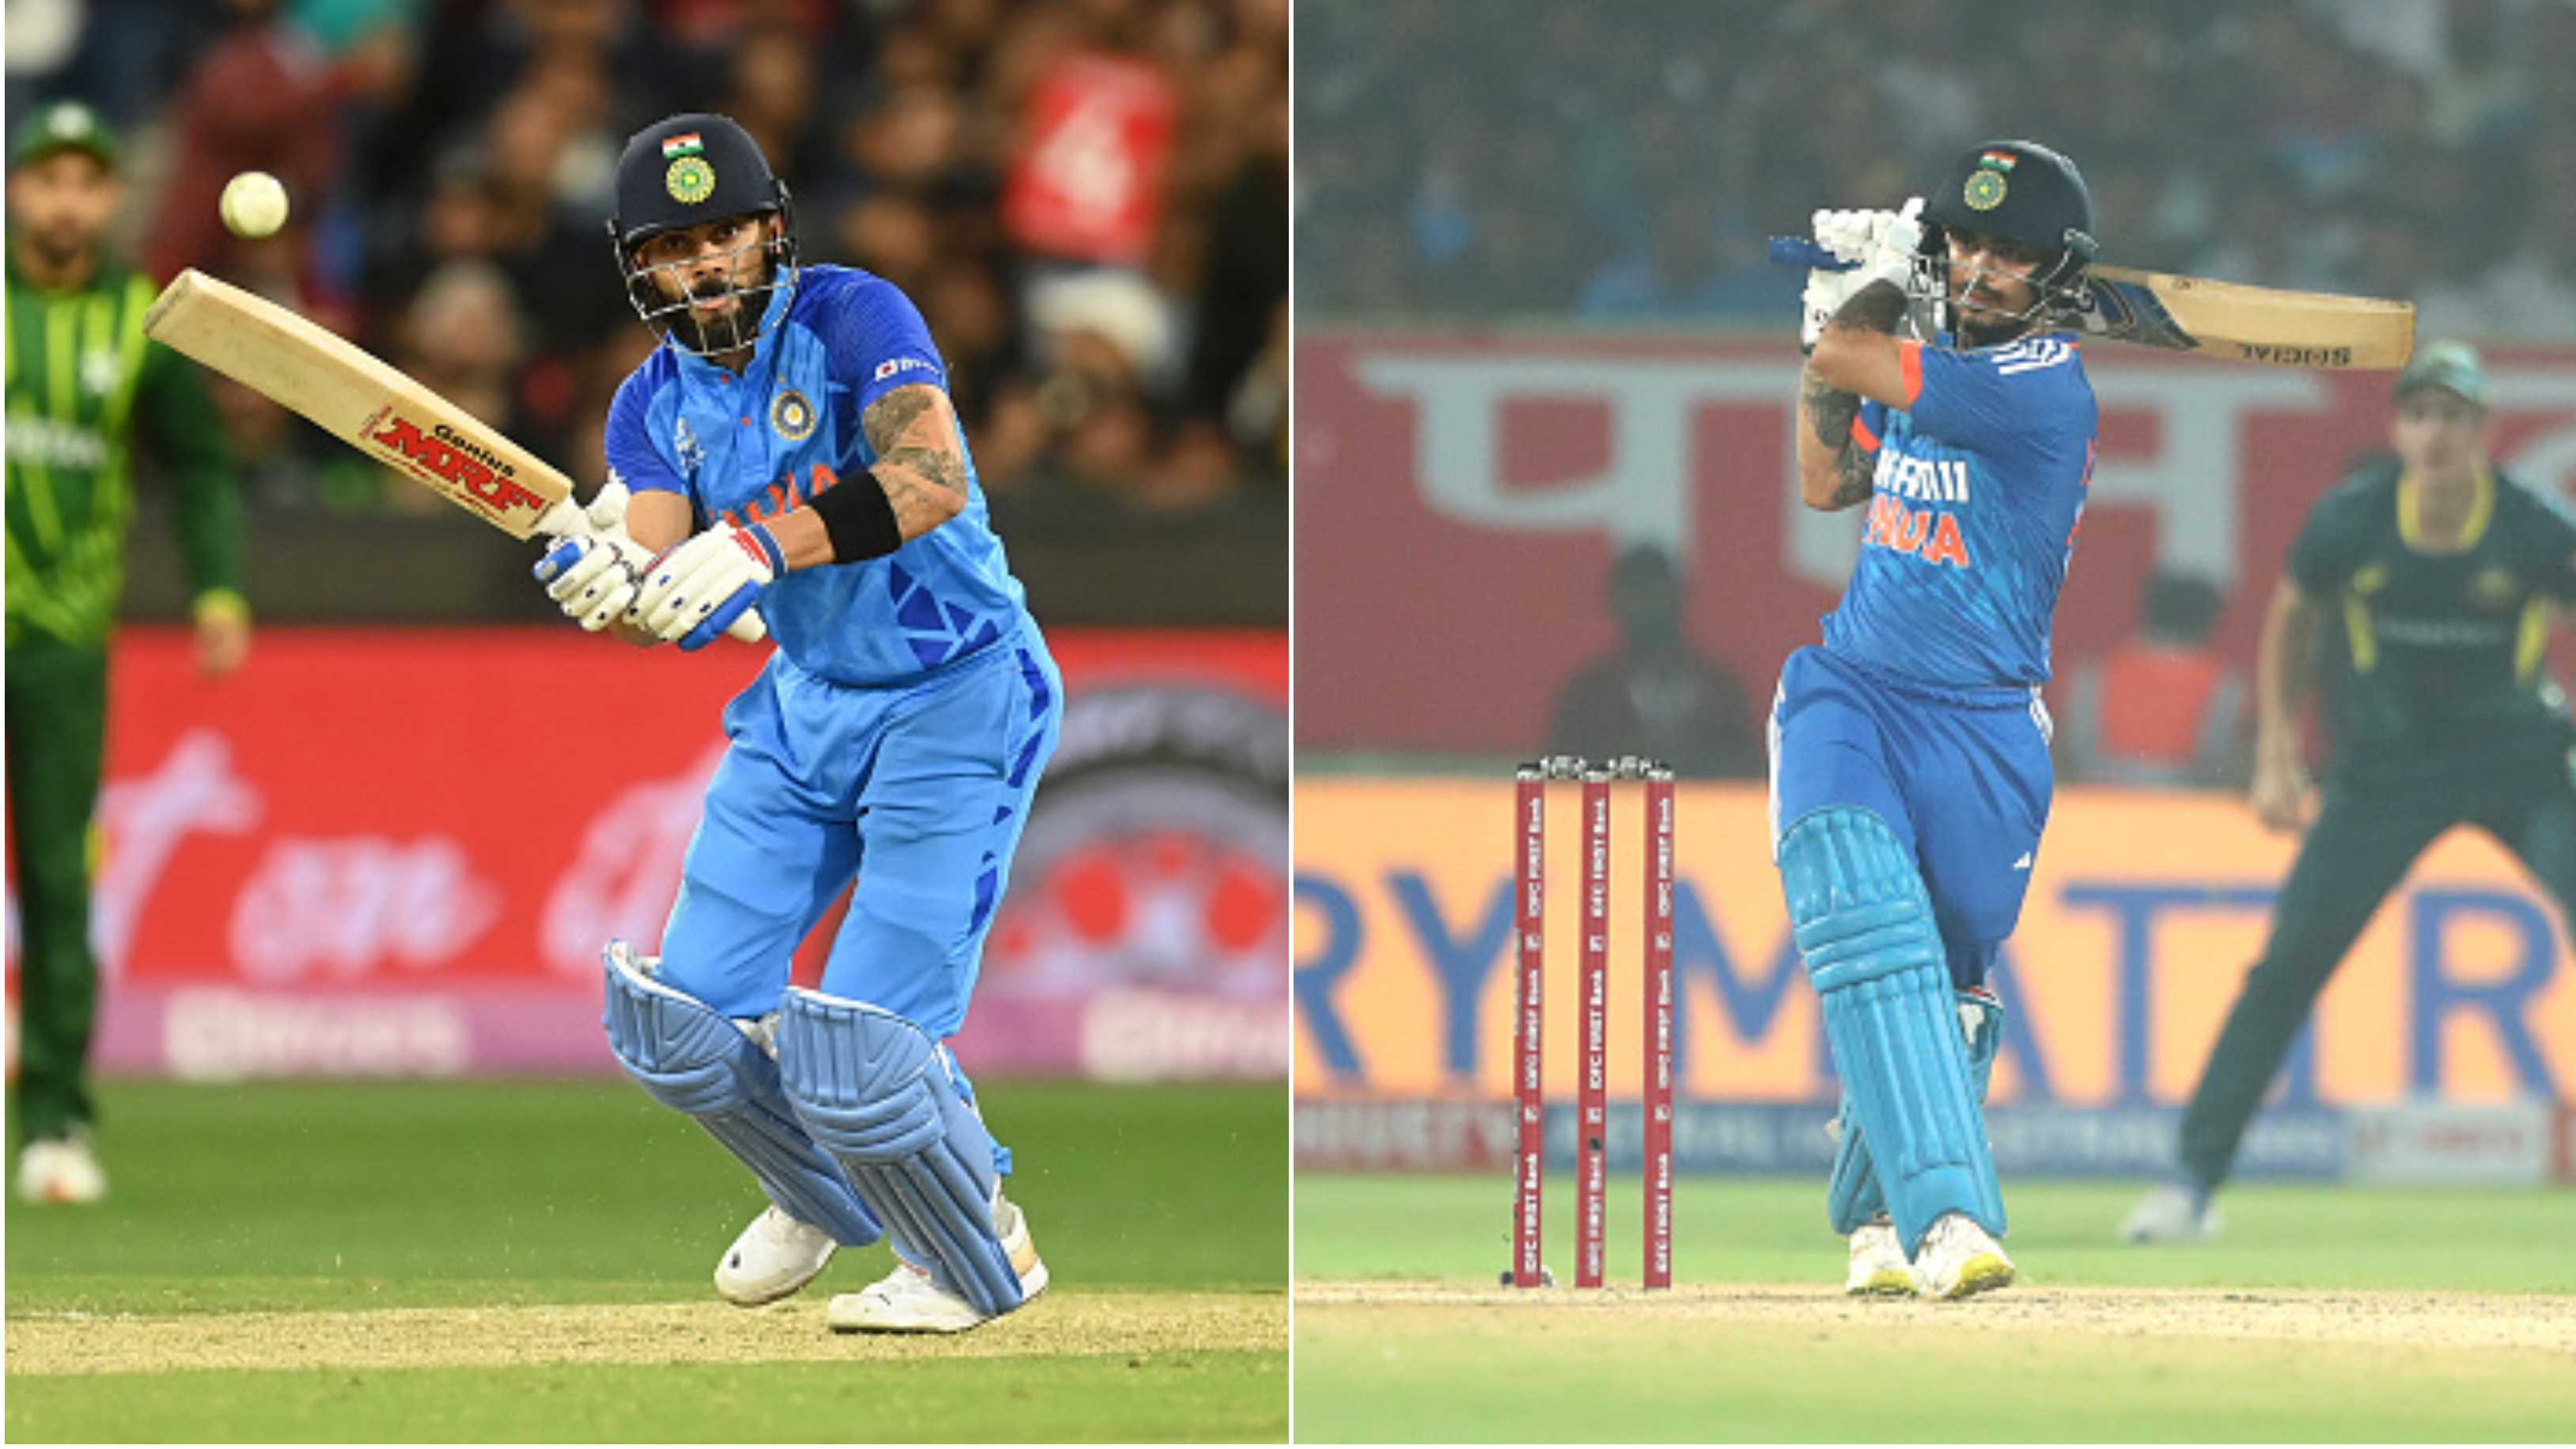 Selectors had role-clarity discussions with Virat Kohli for T20Is, Ishan Kishan’s non-selection remains a mystery: Report